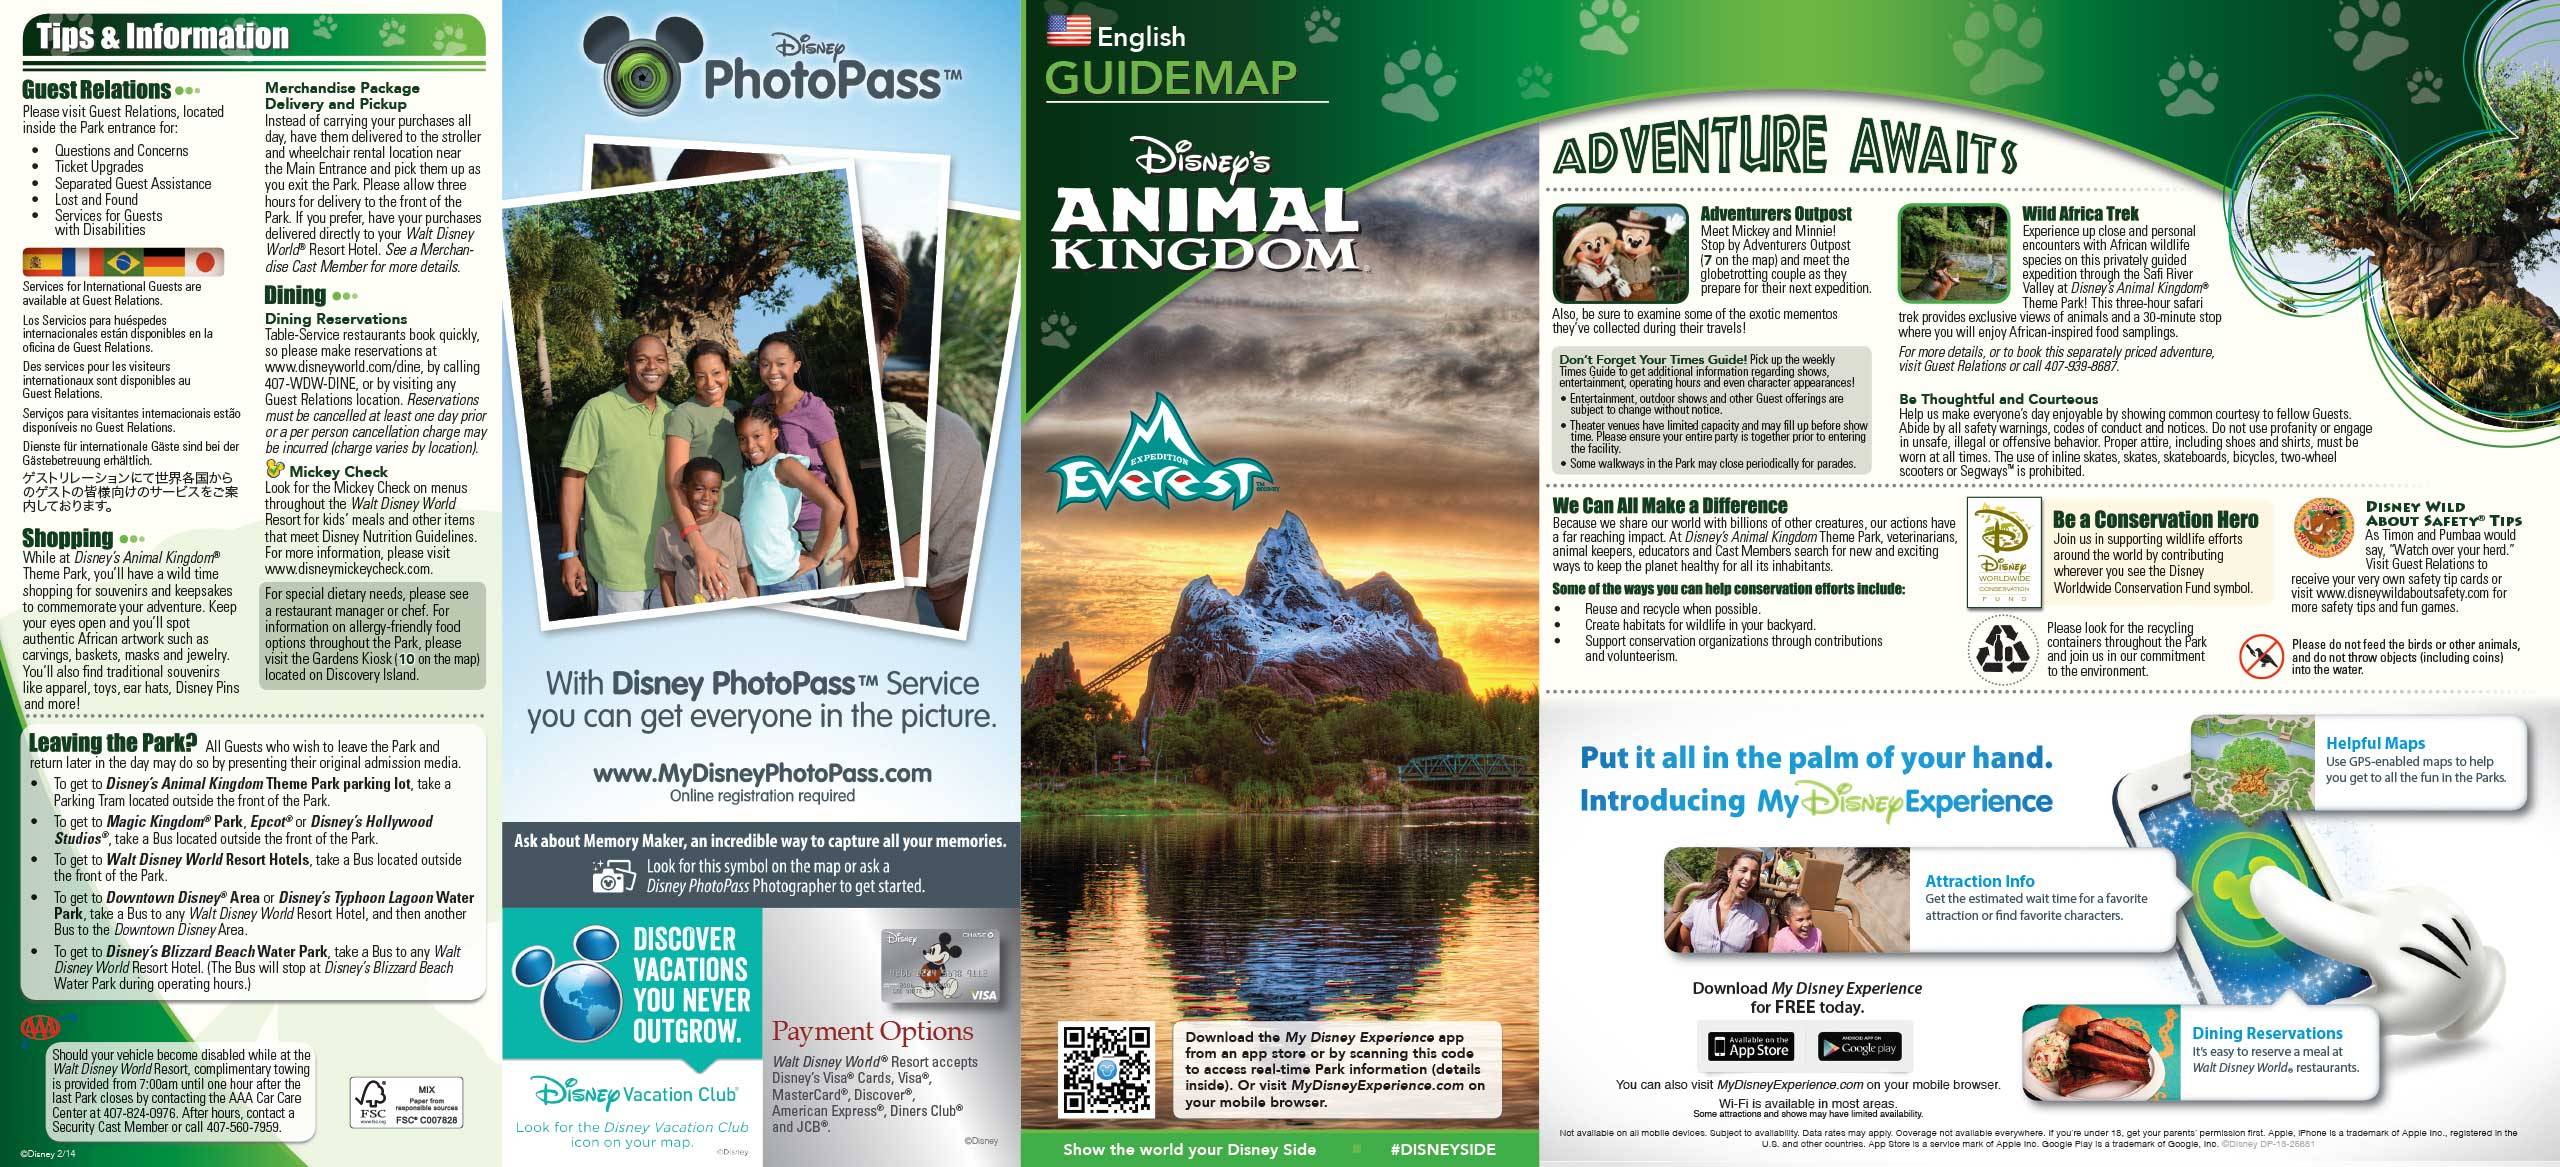 2014 Disney's Animal Kingdom guide map with FastPass+ details